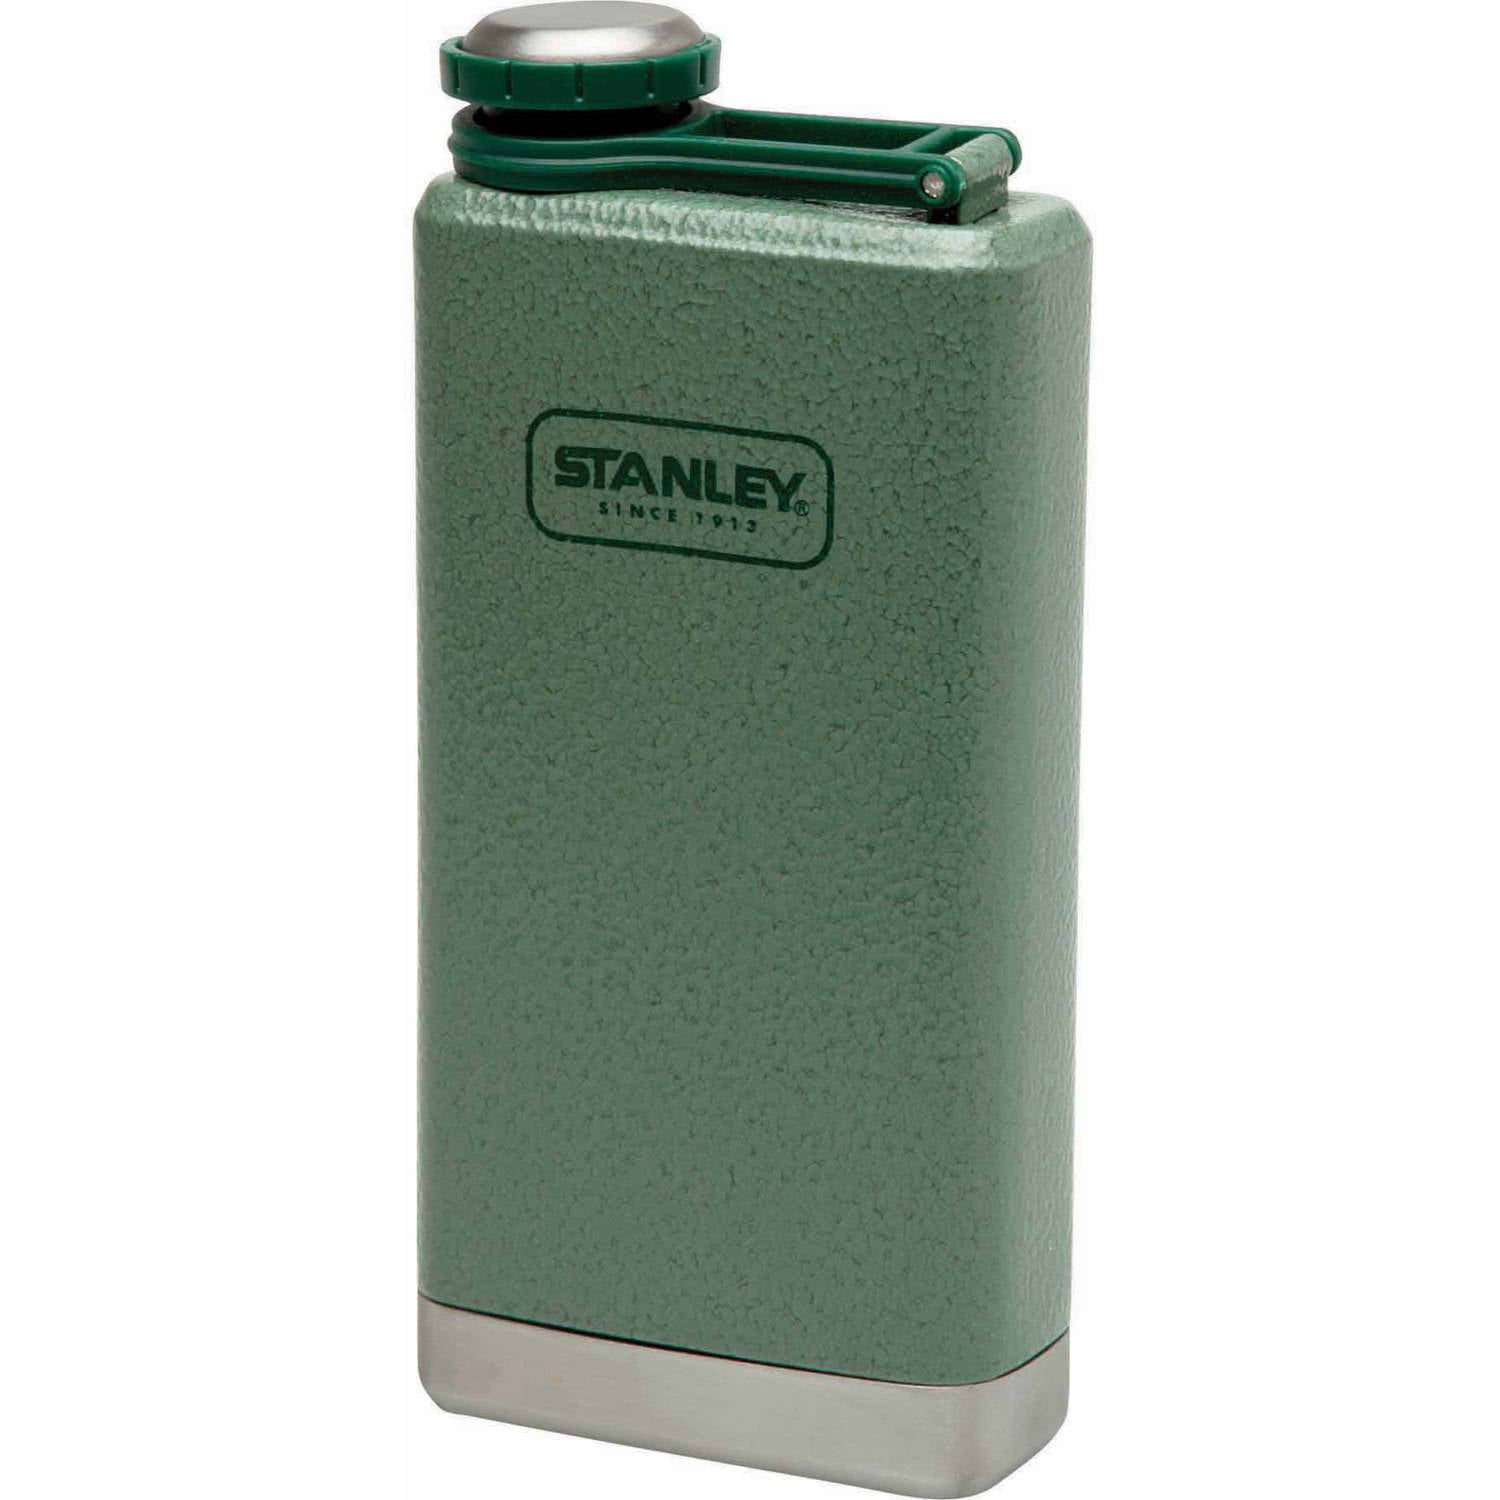 Stanley Classic 8oz Flask - Hammertone Navy - Used - Good - Ourland Outdoor